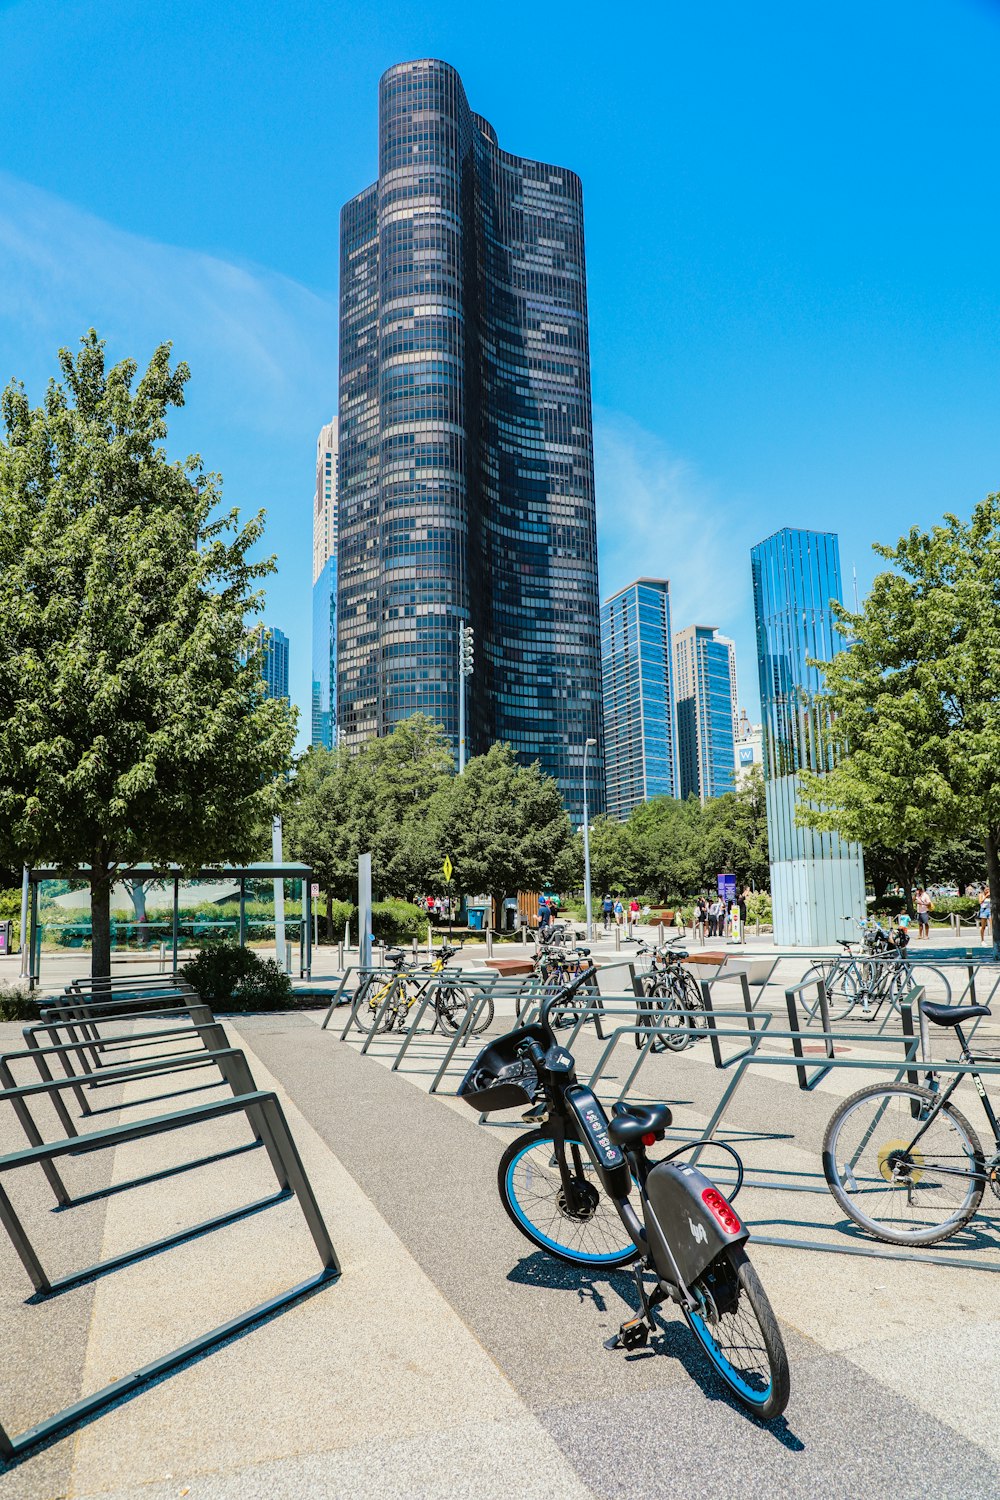 a group of bicycles parked in front of a tall building